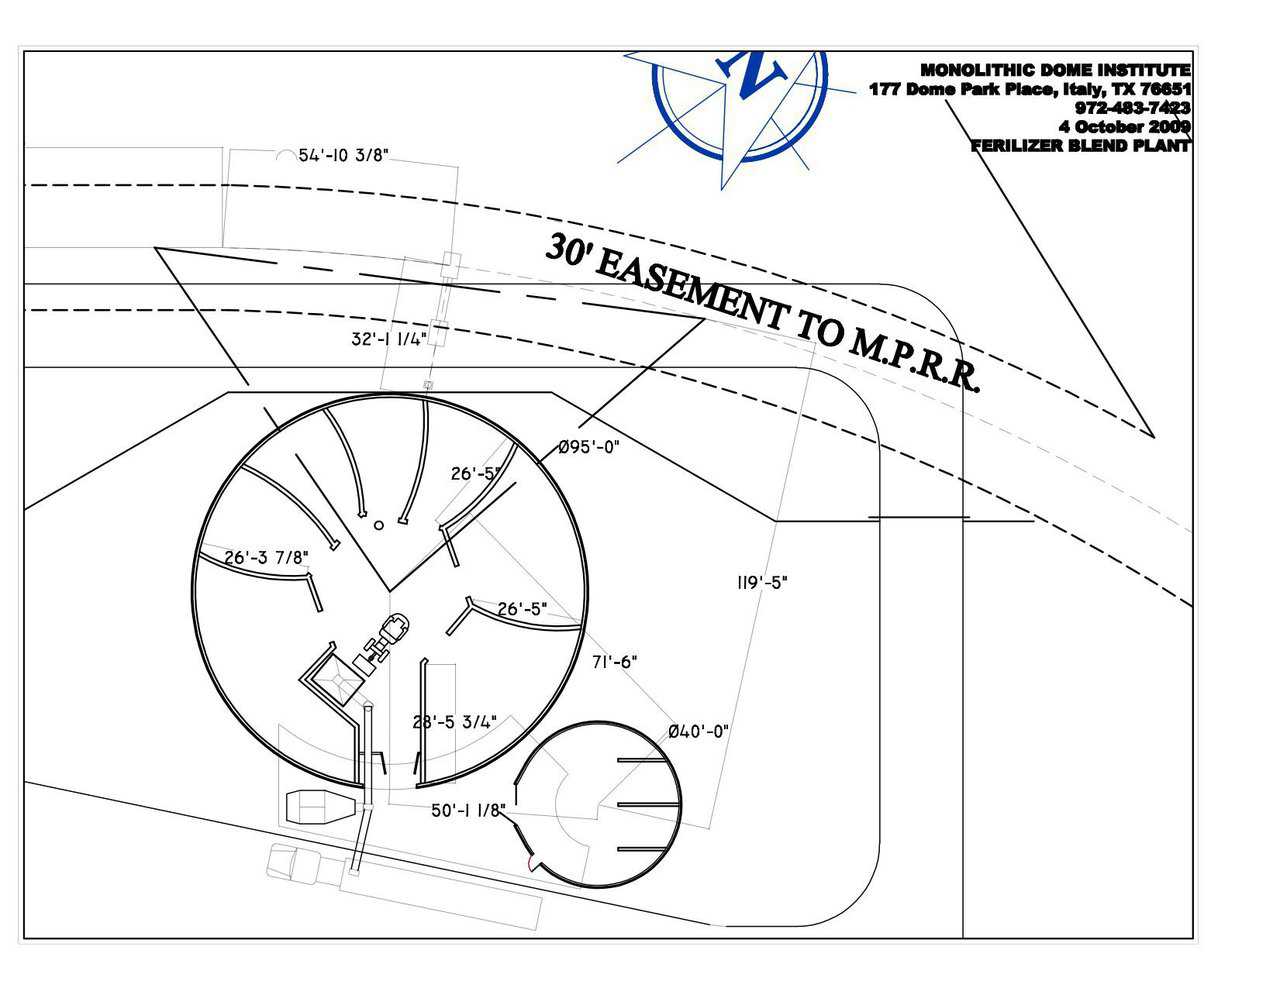 Site plan — El Dorado’s facility in Bryan, Texas includes two domes: one with a 40’ diameter and one with a 95’ diameter.